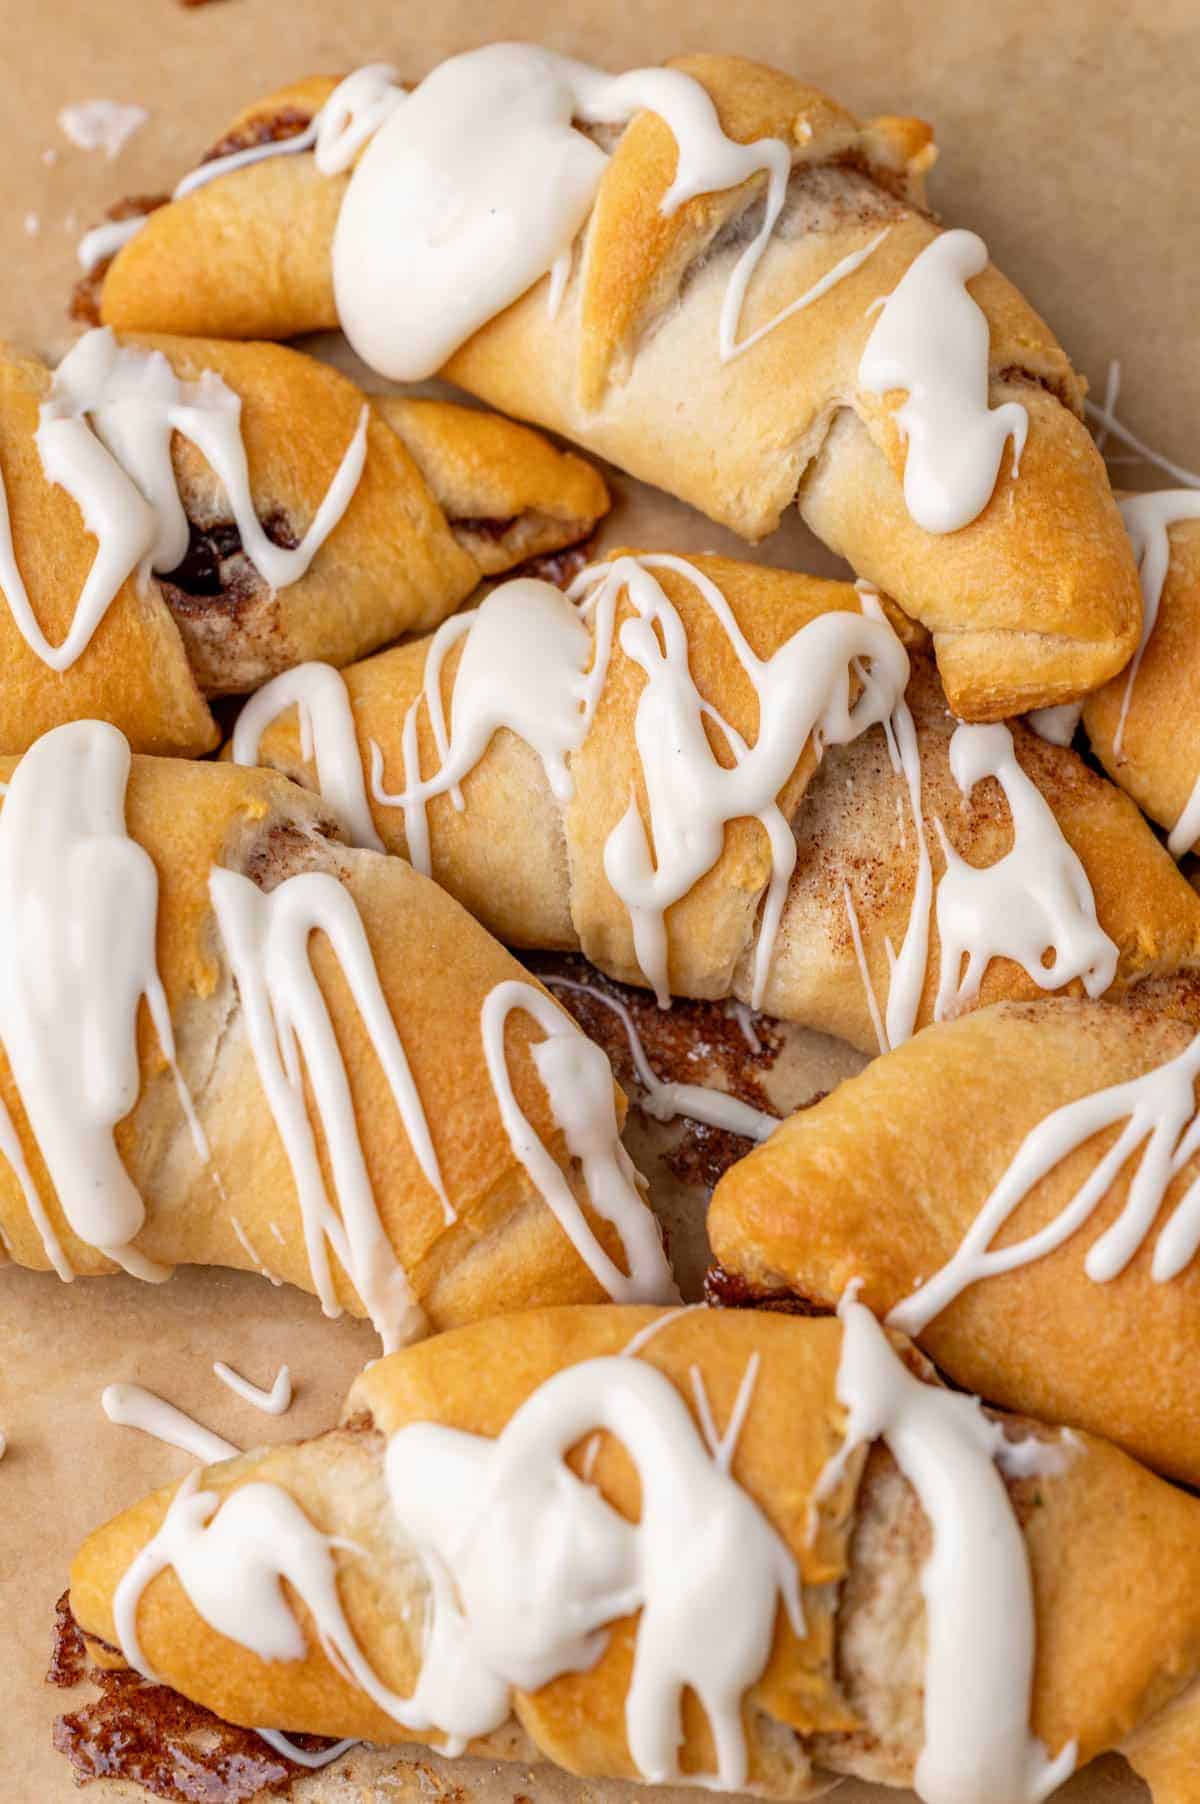 crescent roll cinnamon rolls with glaze on a table.
